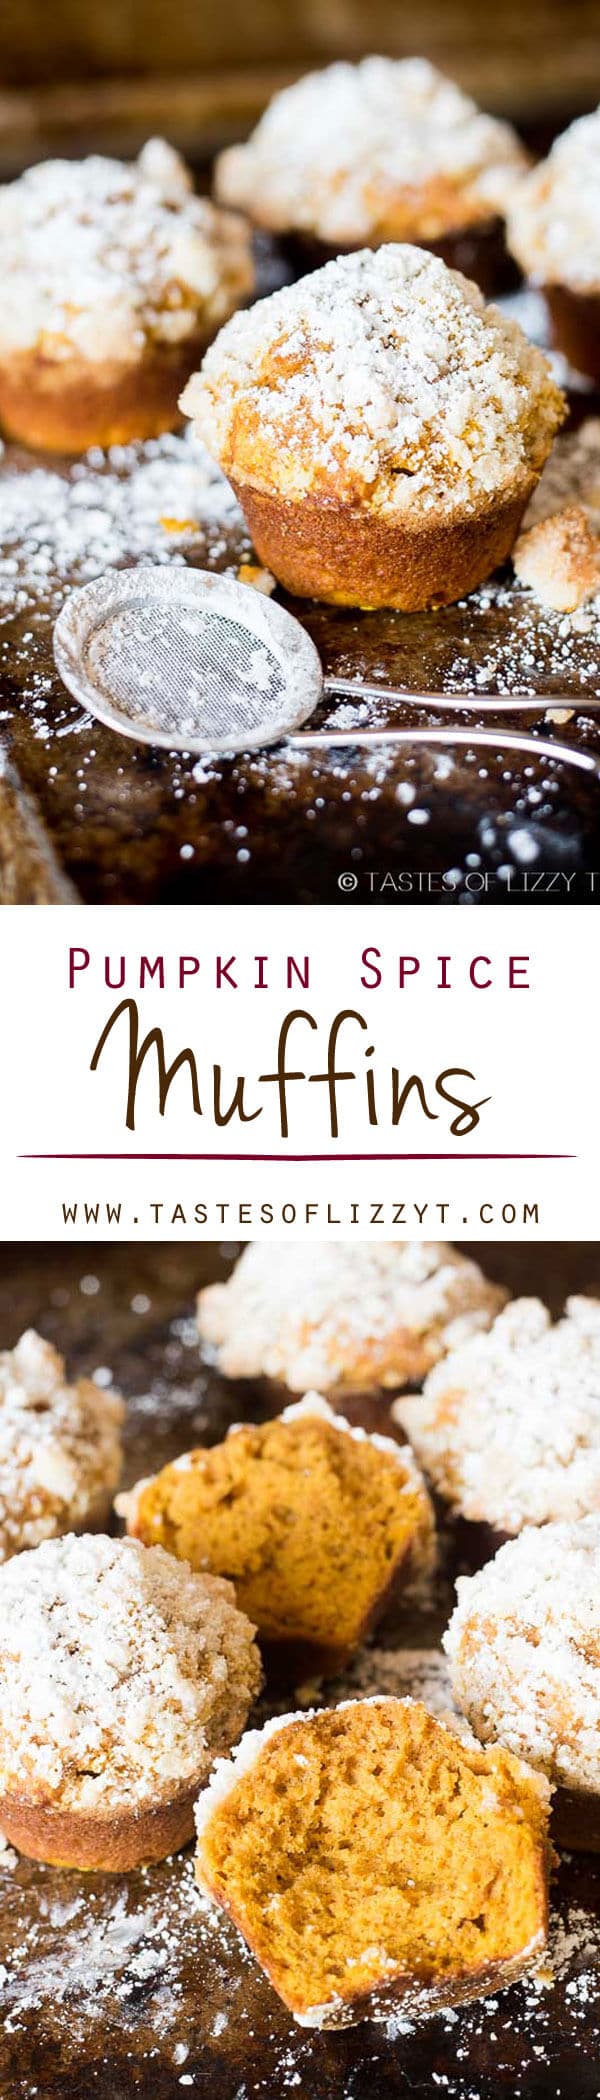 This pumpkin spice muffin is lightly spiced, soft and moist. The streusel and powdered sugar on top adds a hint of sweetness to each bite.